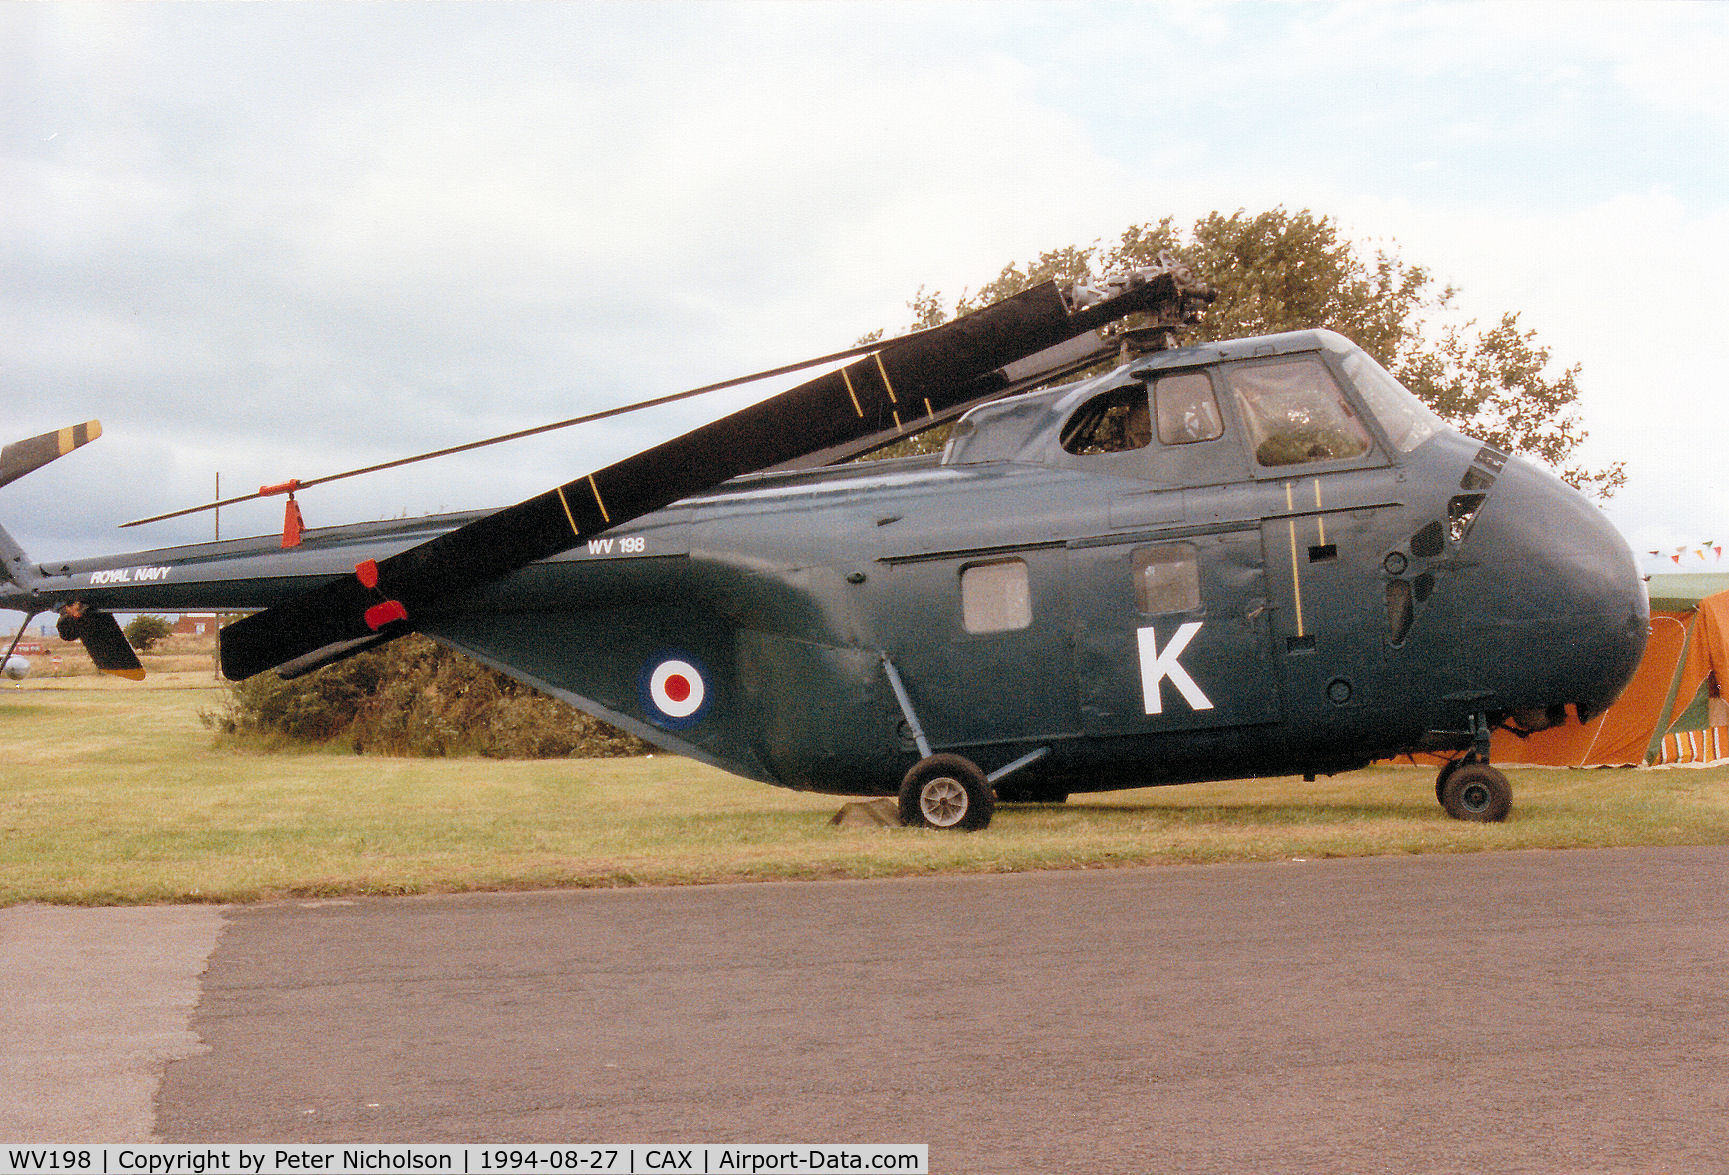 WV198, 1952 Westland Whirlwind HAR.21 C/N 55-289, The Solway Aviation Museum displayed their Whirlwind HAR.21 at the 1994 Carlisle Airshow. It now wears 845 Squadron markings.